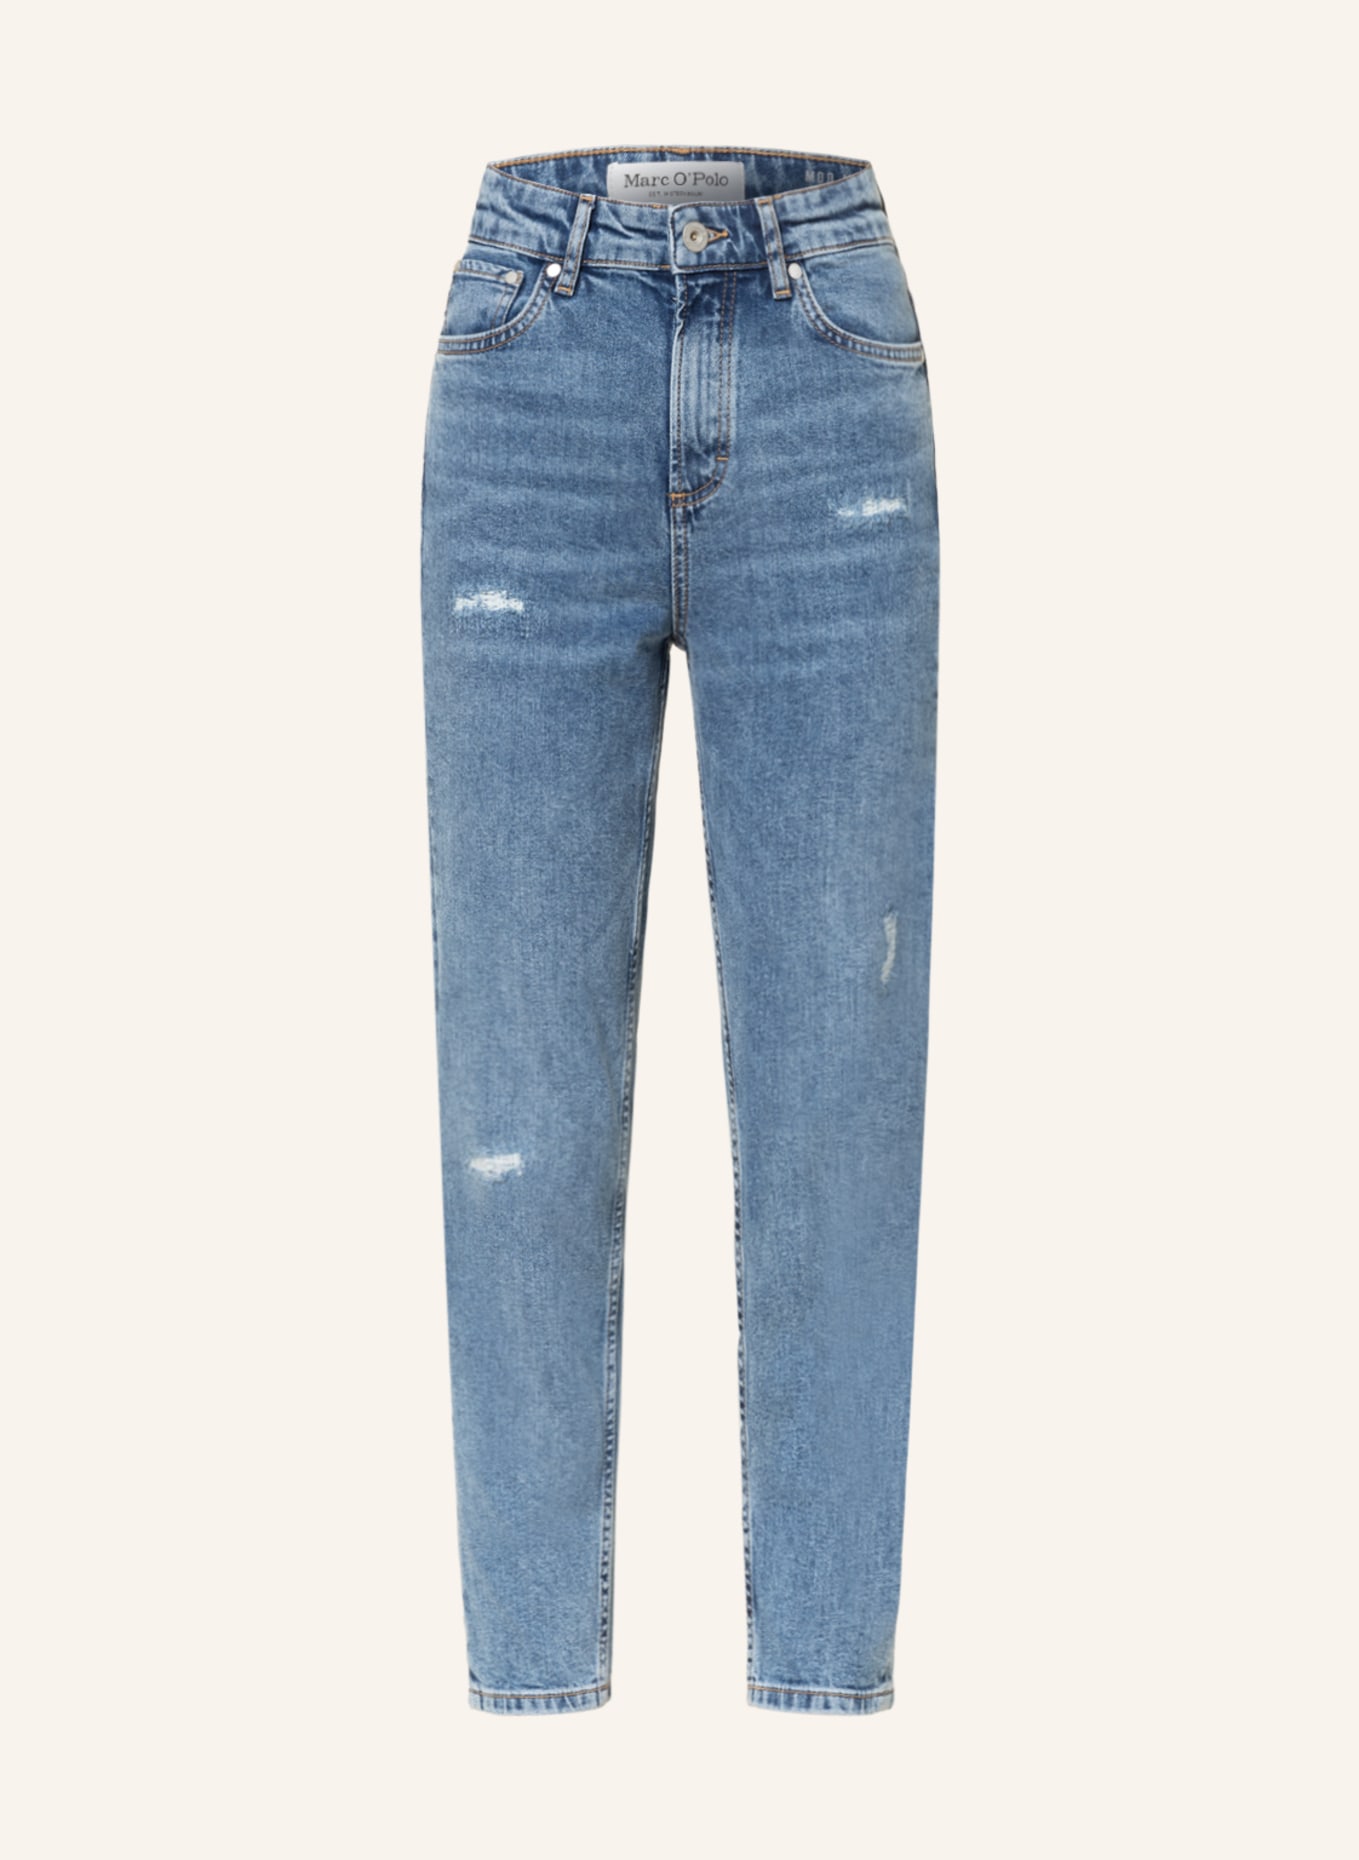 Marc O'Polo 7/8 jeans, Color: 057 Sustainable mid blue destroy w (Image 1)